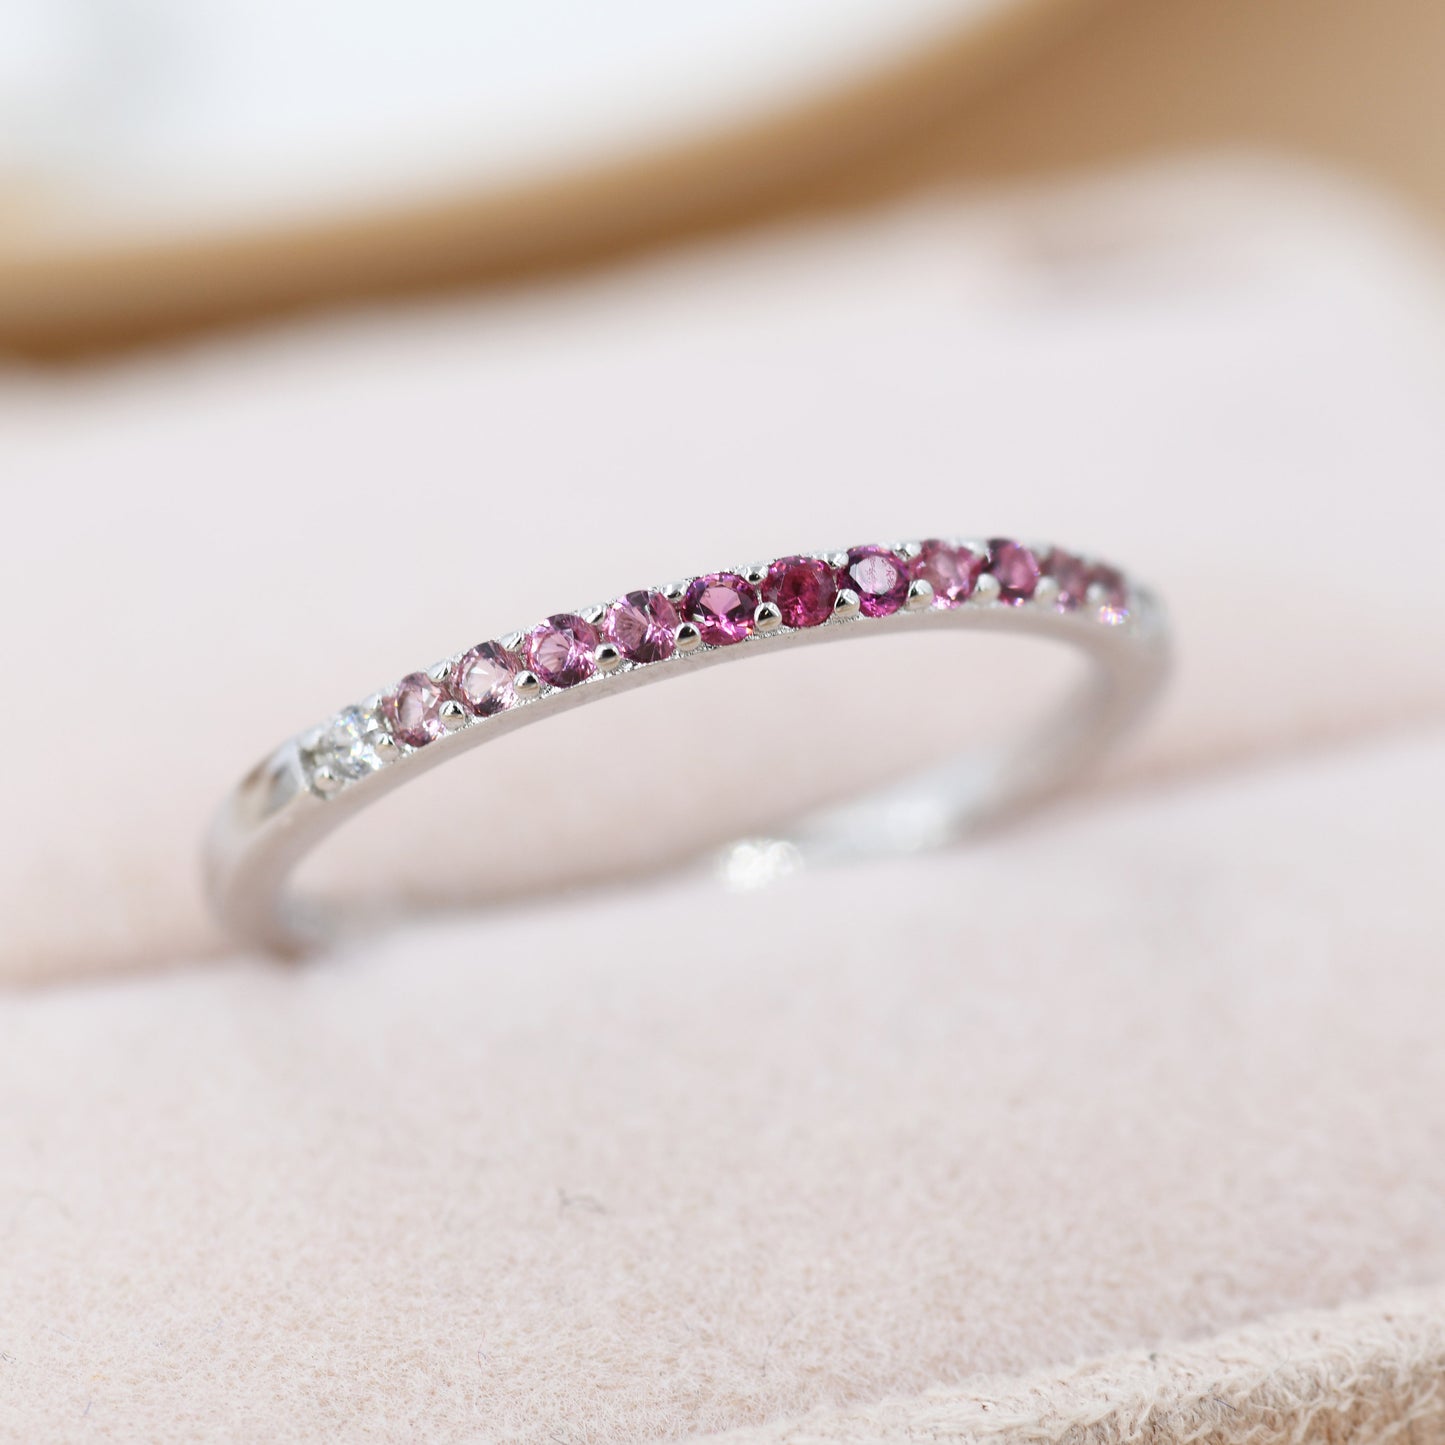 Ruby Red Ombre Half Eternity Ring in Sterling Silver, Silver or Gold, Red CZ Skinny Ring, Minimalist Stacking Ring US 5 - 8